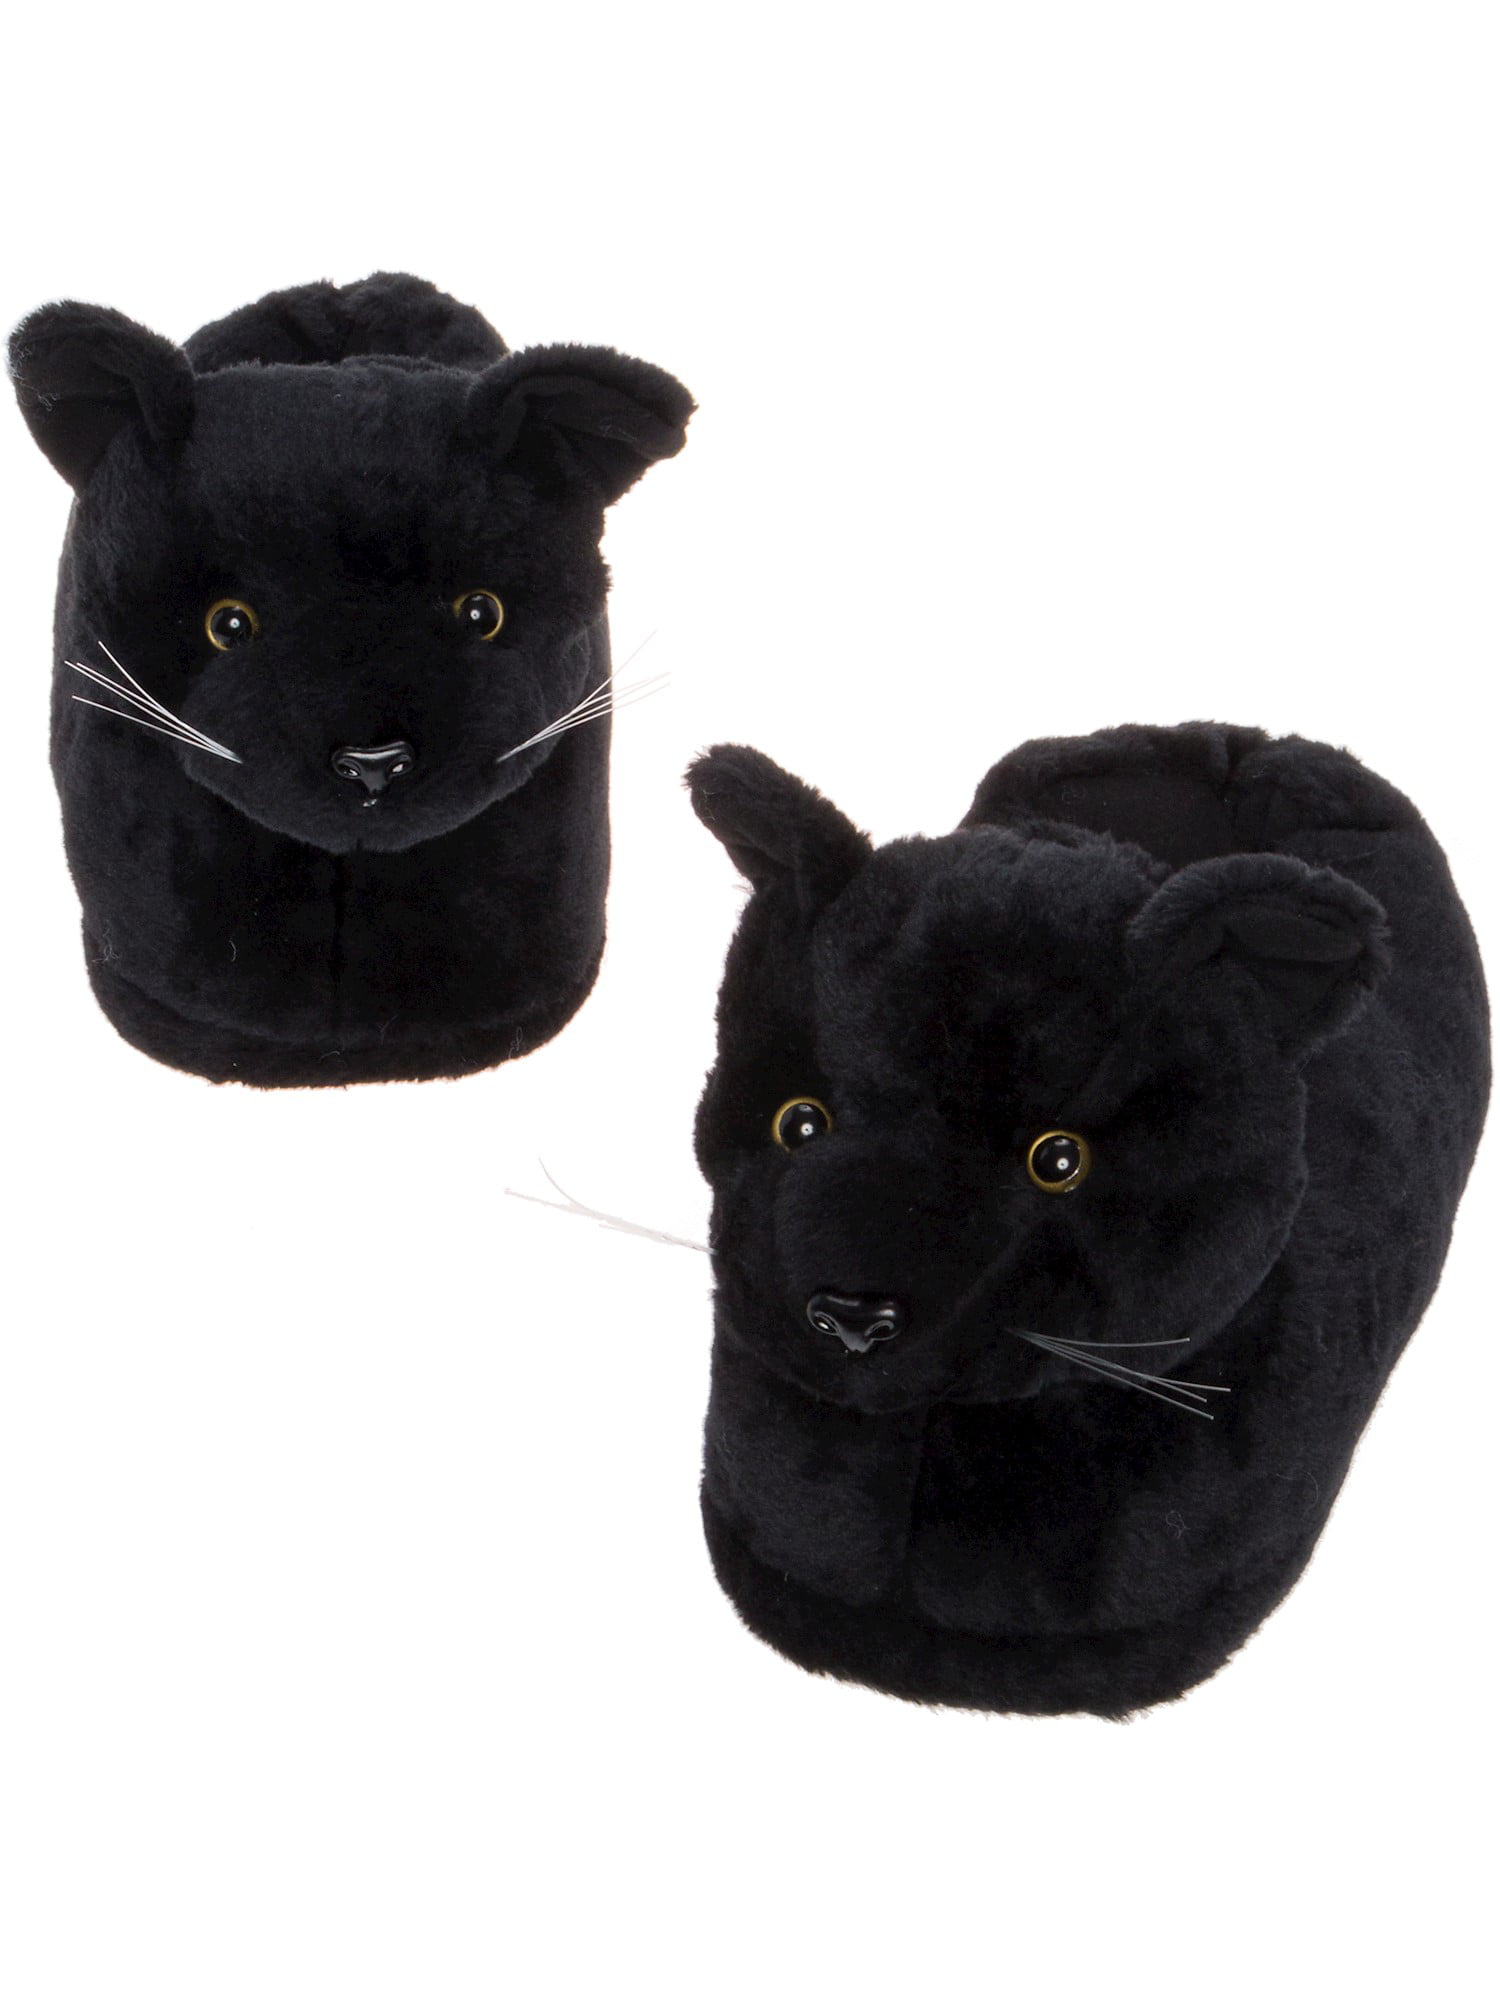 Silver Lilly - Black Cat Slippers 